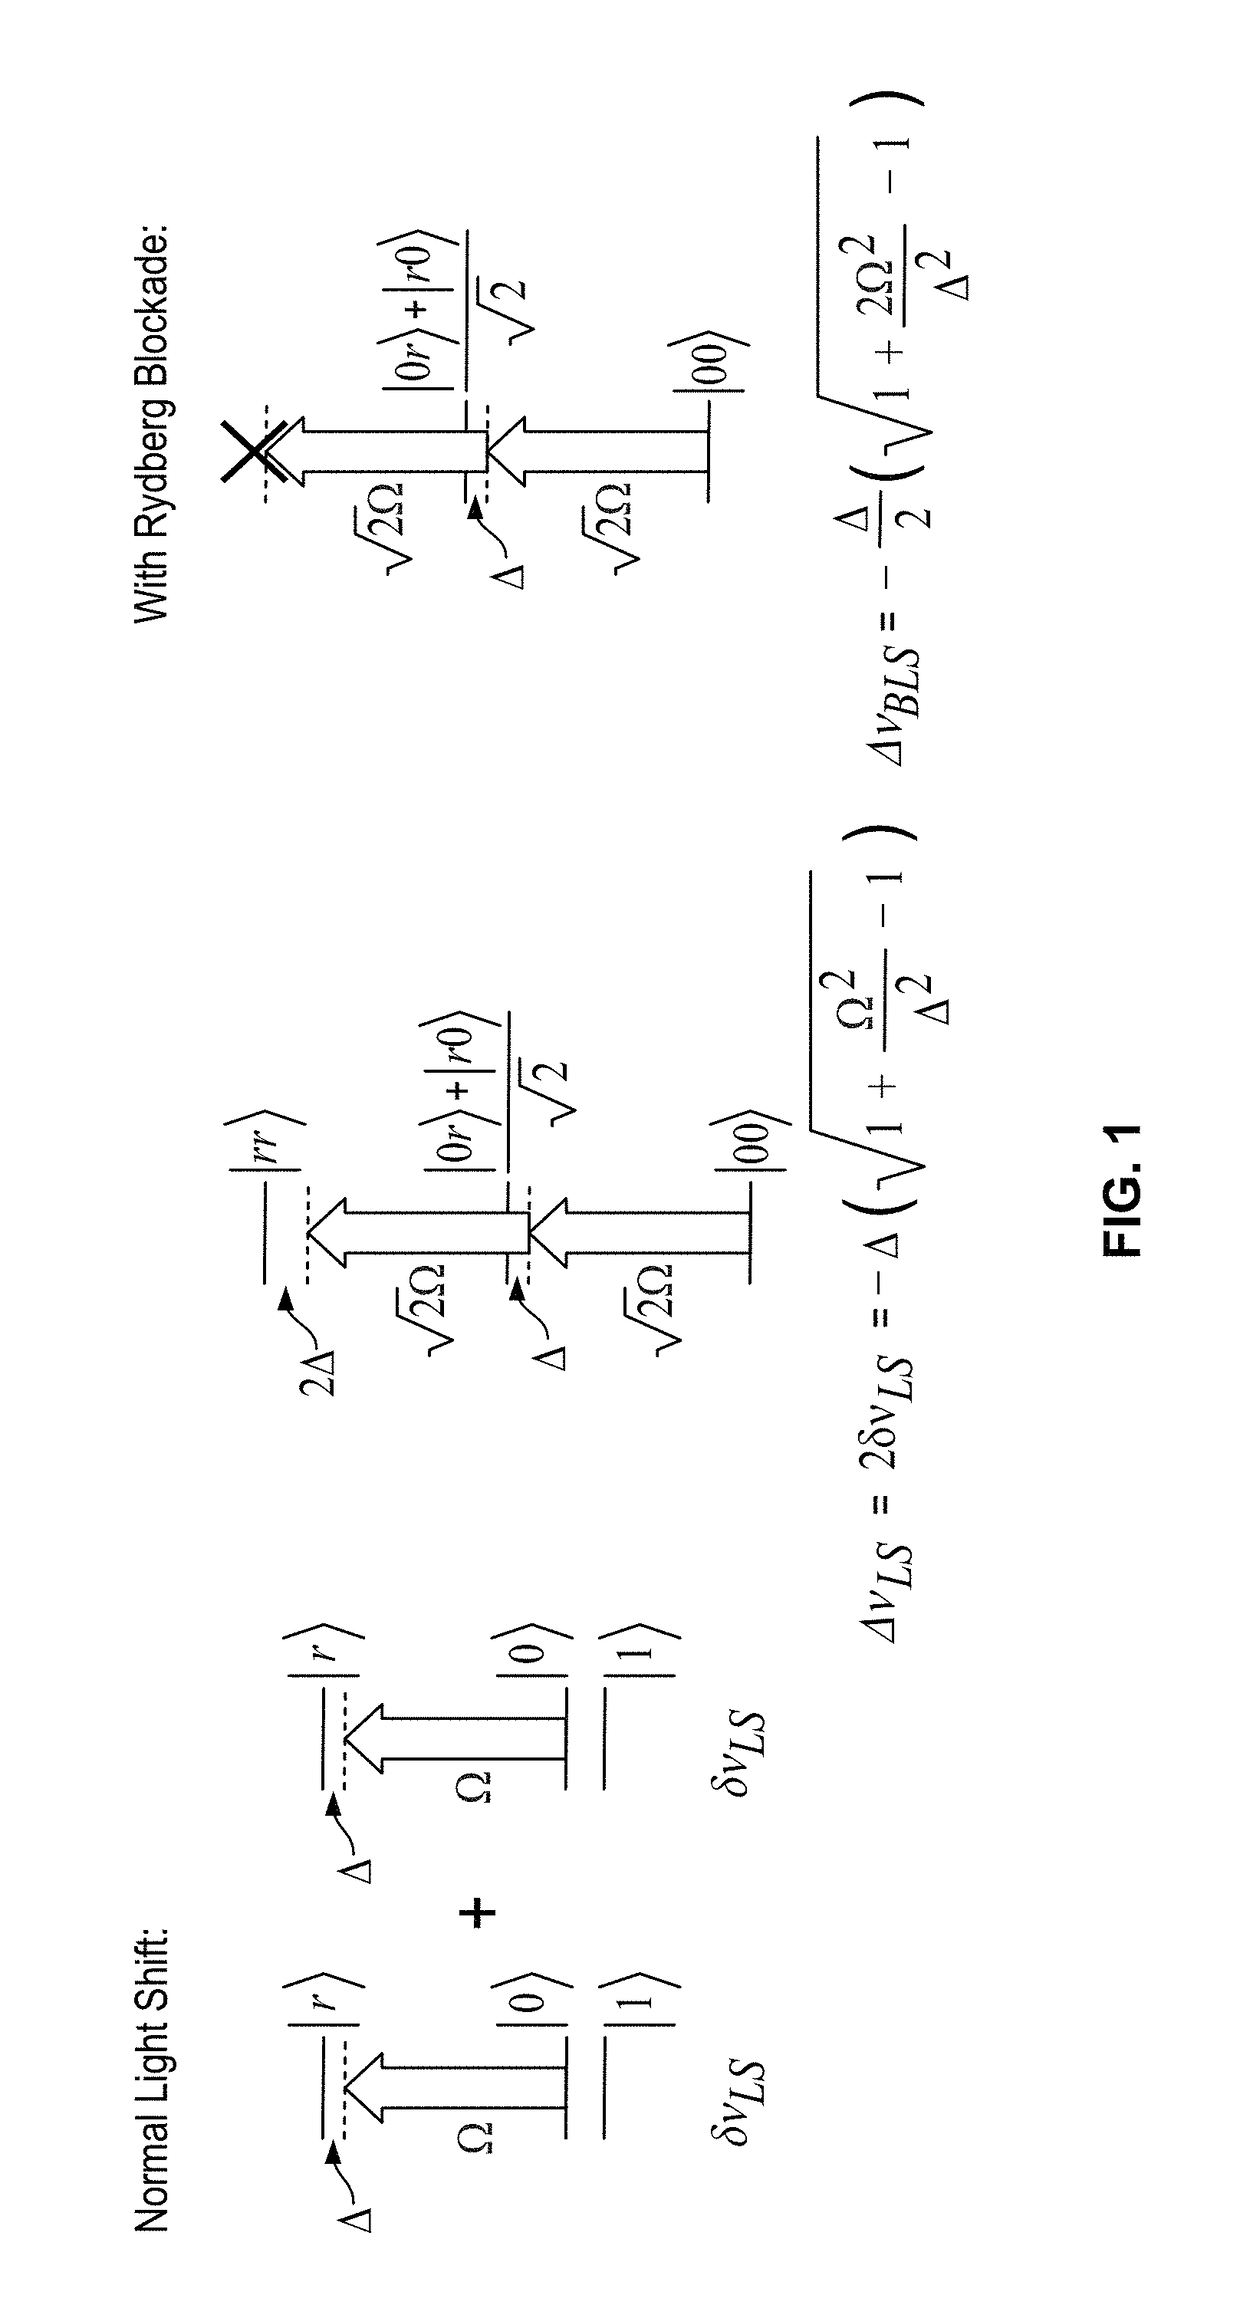 Method and apparatus for quantum information processing using entangled neutral-atom qubits